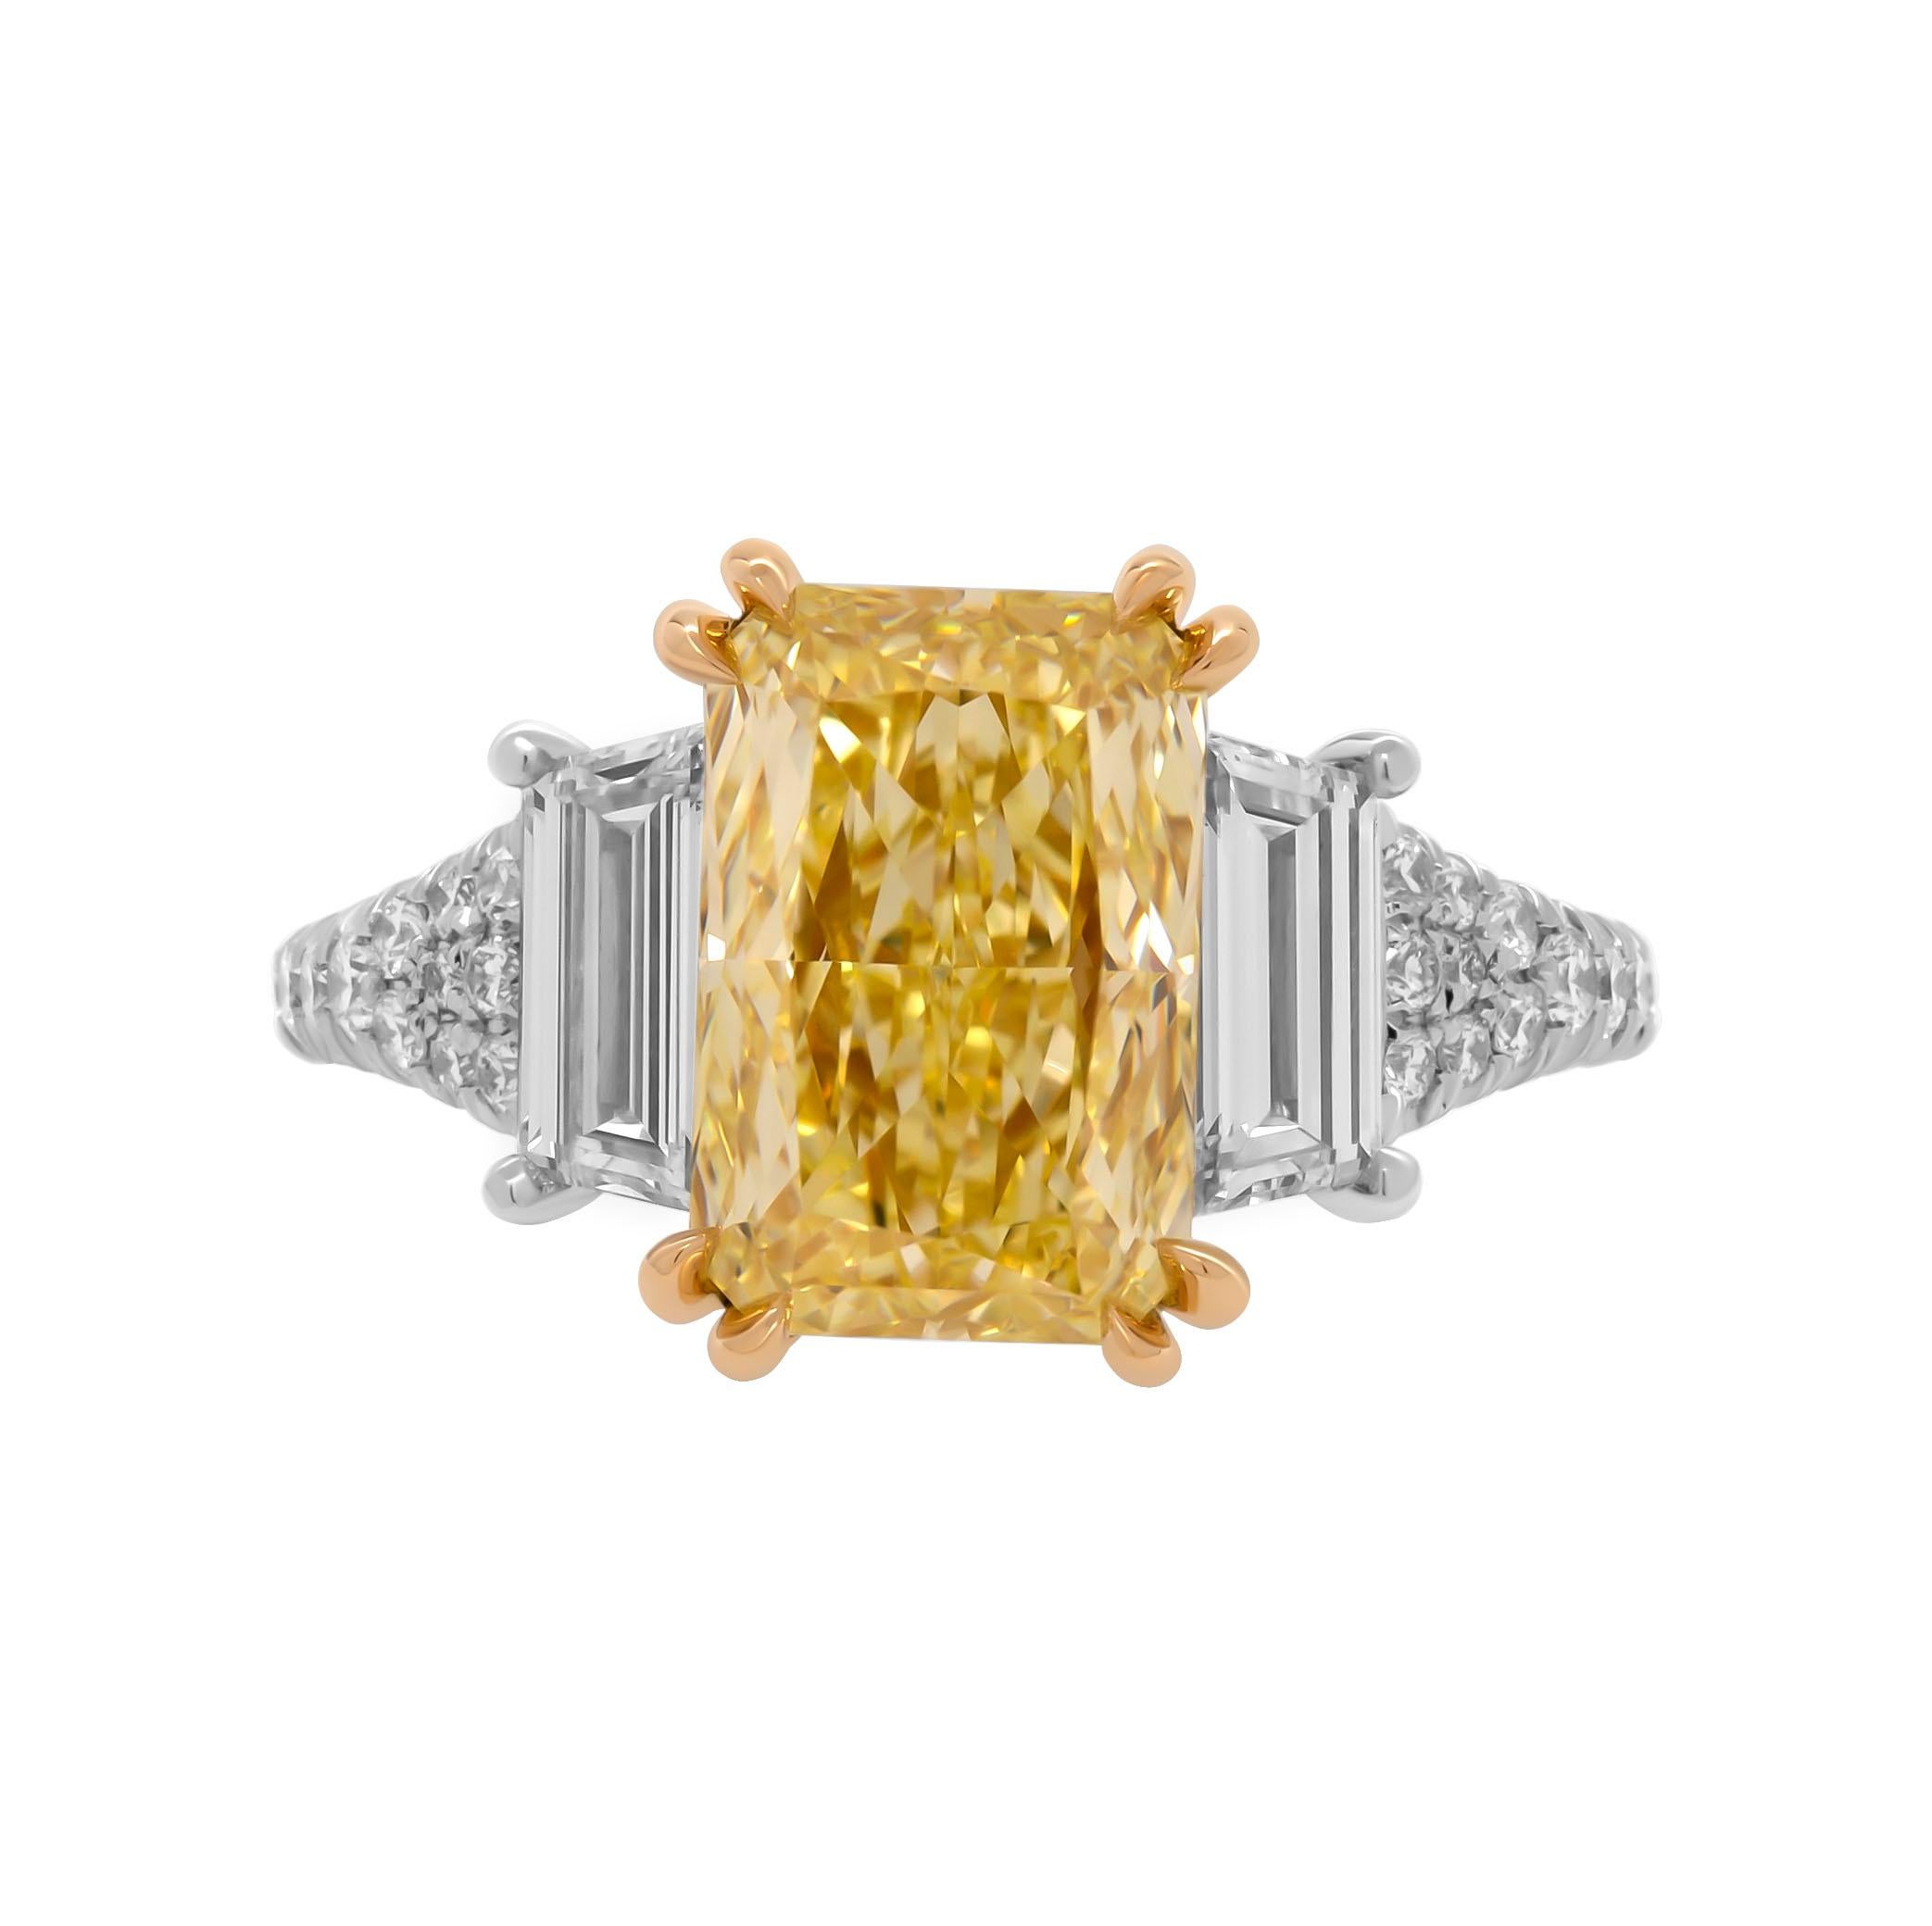 3 stone ring in Platinum & 18K Yellow Gold
Center: 3.34ct Natural Fancy Yellow Even VVS2 Radiant Shape Diamond GIA#2225384189 
Side stones: Two side stones: 0.93ct E color VVS clarity trapezoids 
Cathedral diamond shank; diamond center wire
Total